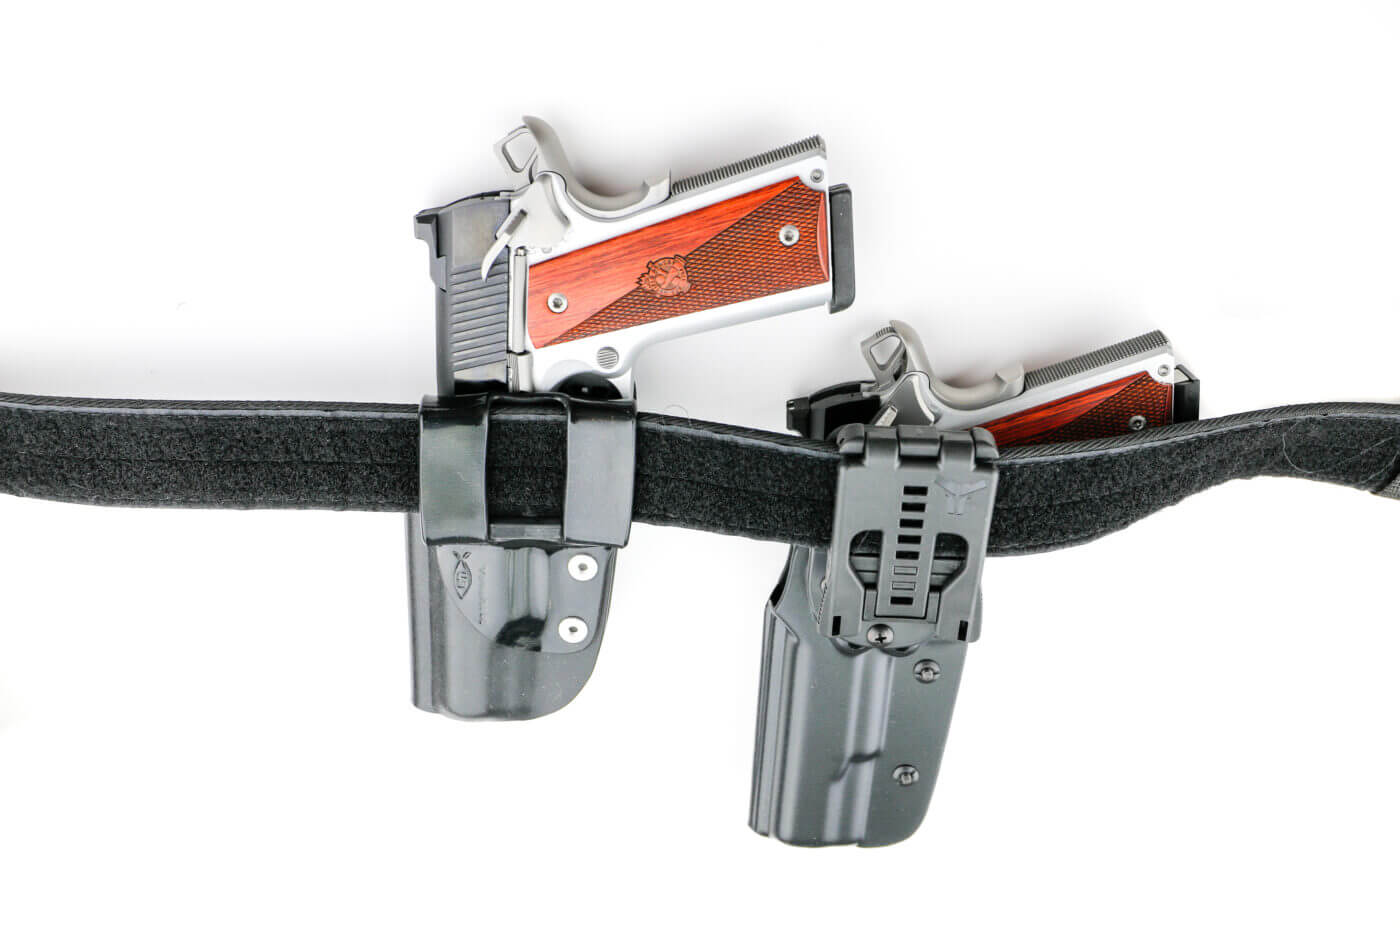 Springfield Armory Ronin 1911s in Blade-Tech holsters